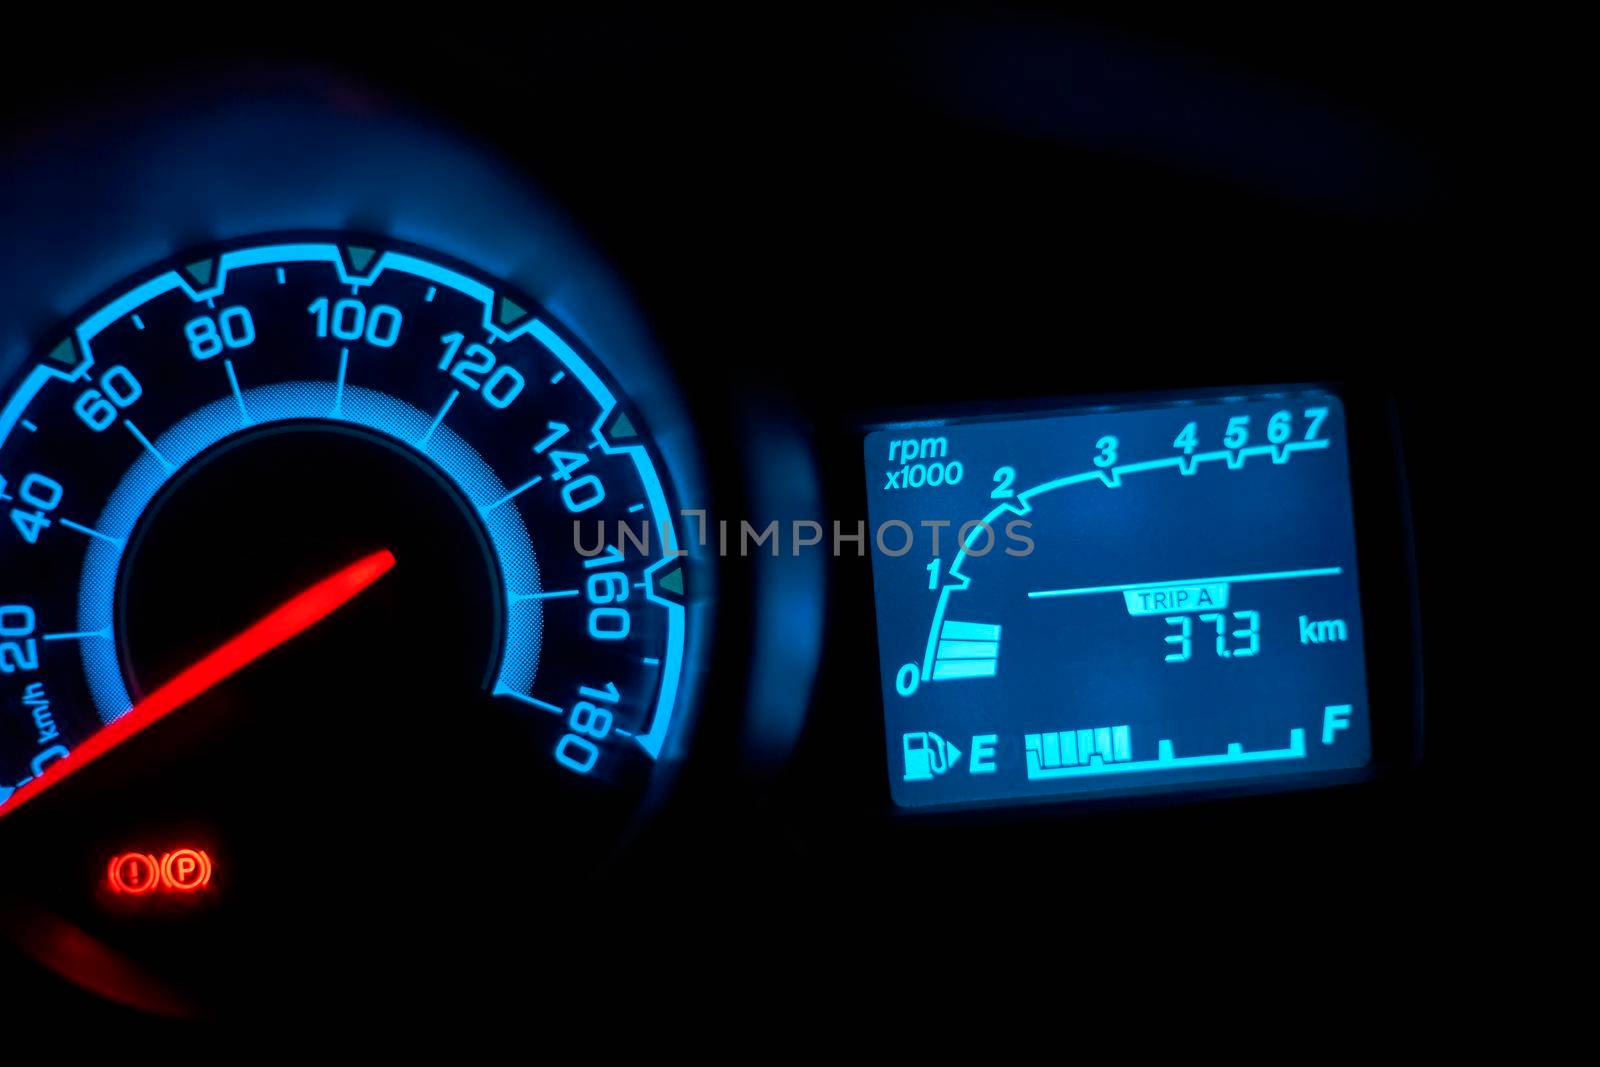 Automobile dashboard in neon light at night. Neon light in blue of car milage and speed panel during parking and many of safety icon and car status signal appearance